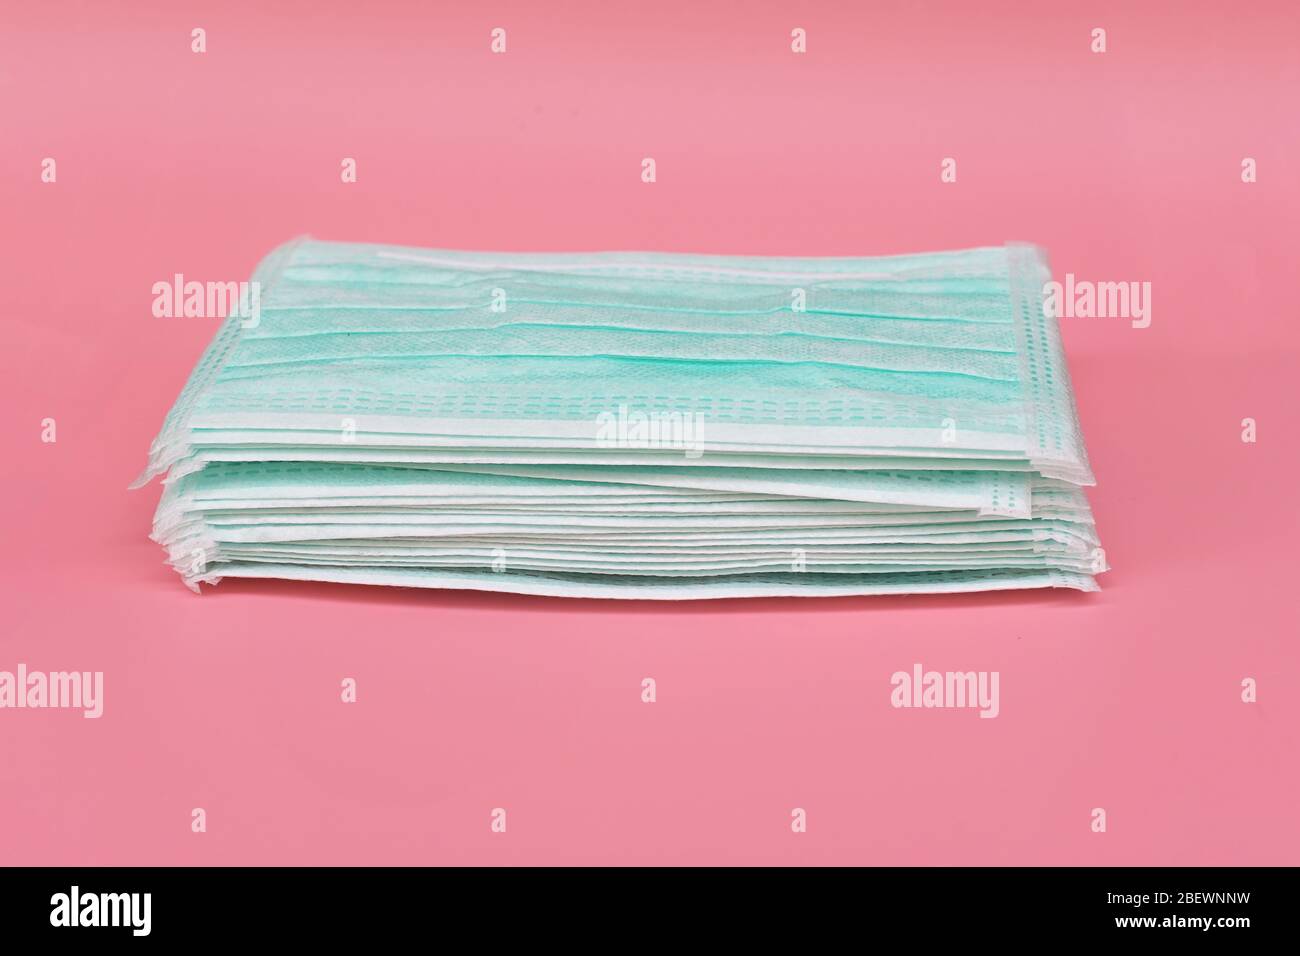 Heap Medical face mask, Medical protective mask on pink background. Disposable surgical face mask cover the mouth and nose. protect Healthcare and Stock Photo